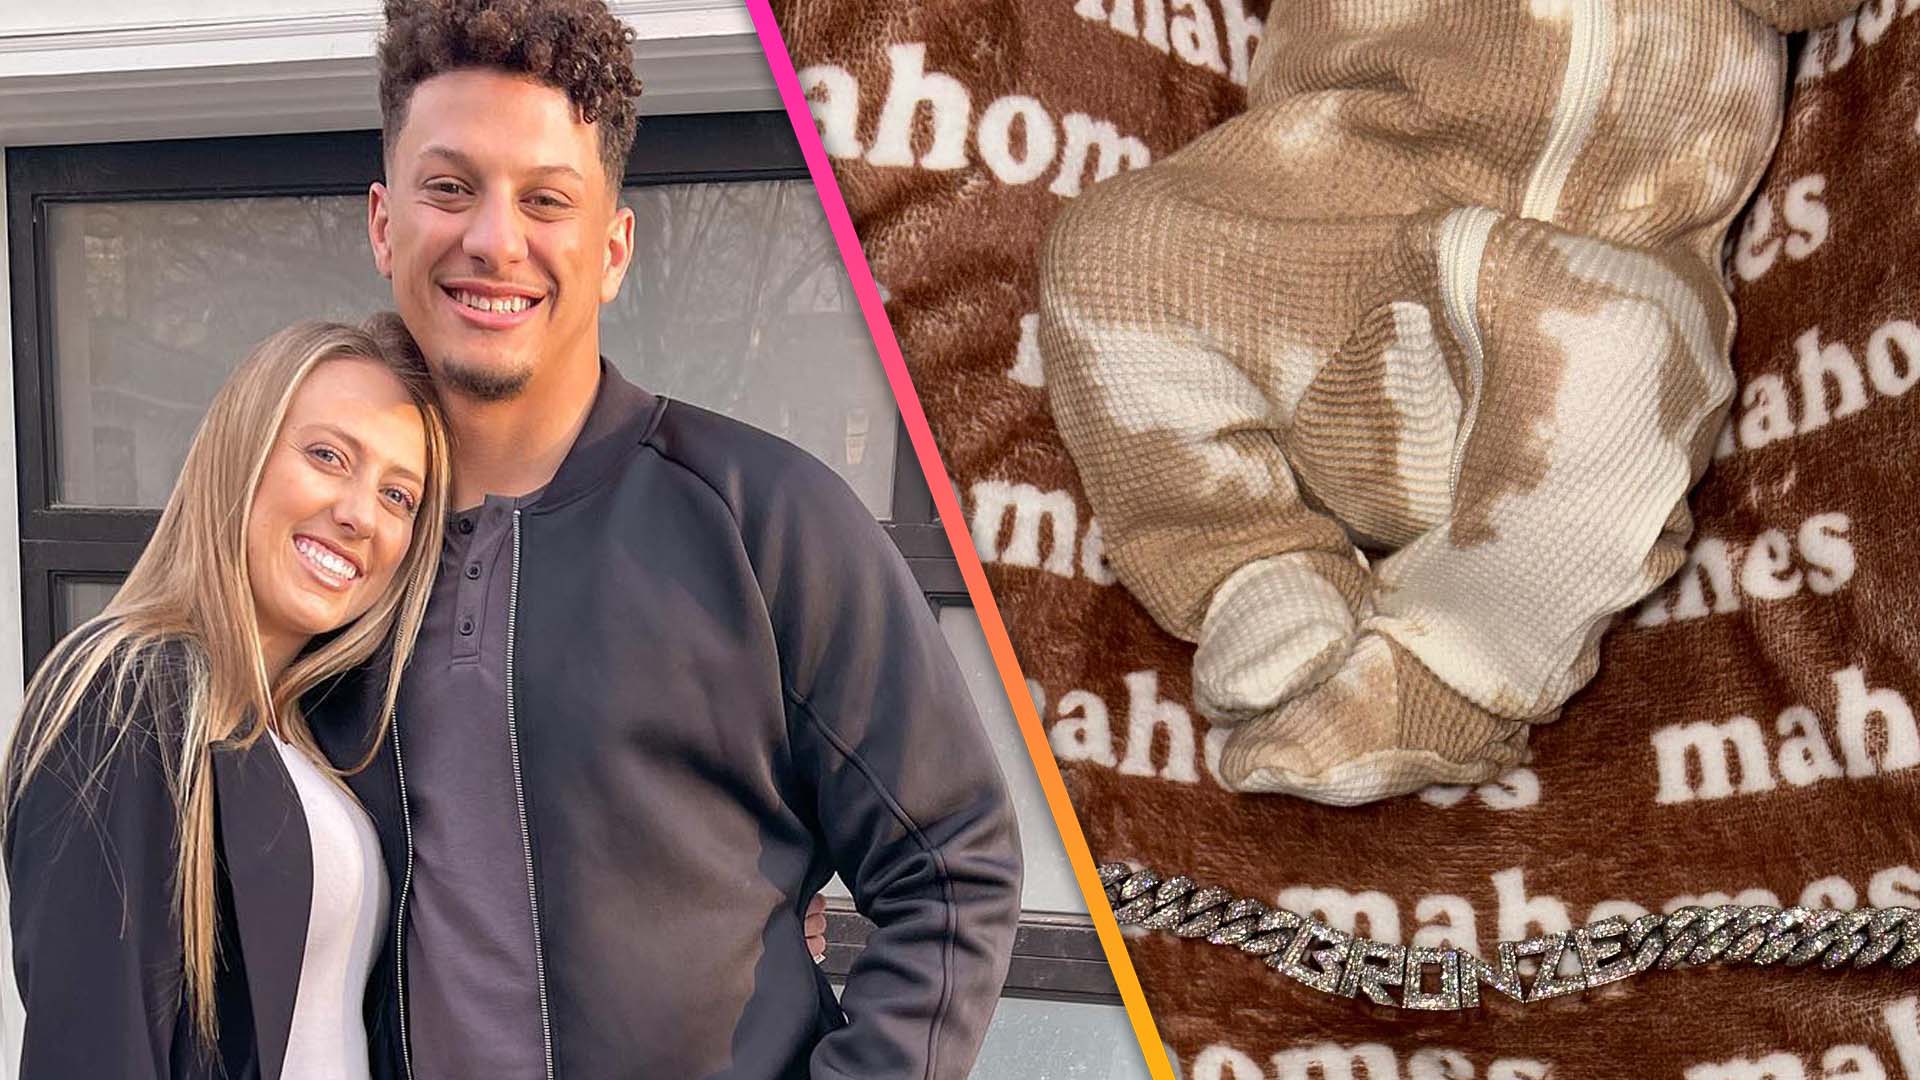 Brittany Mahomes fires back at haters calling her a gold digger